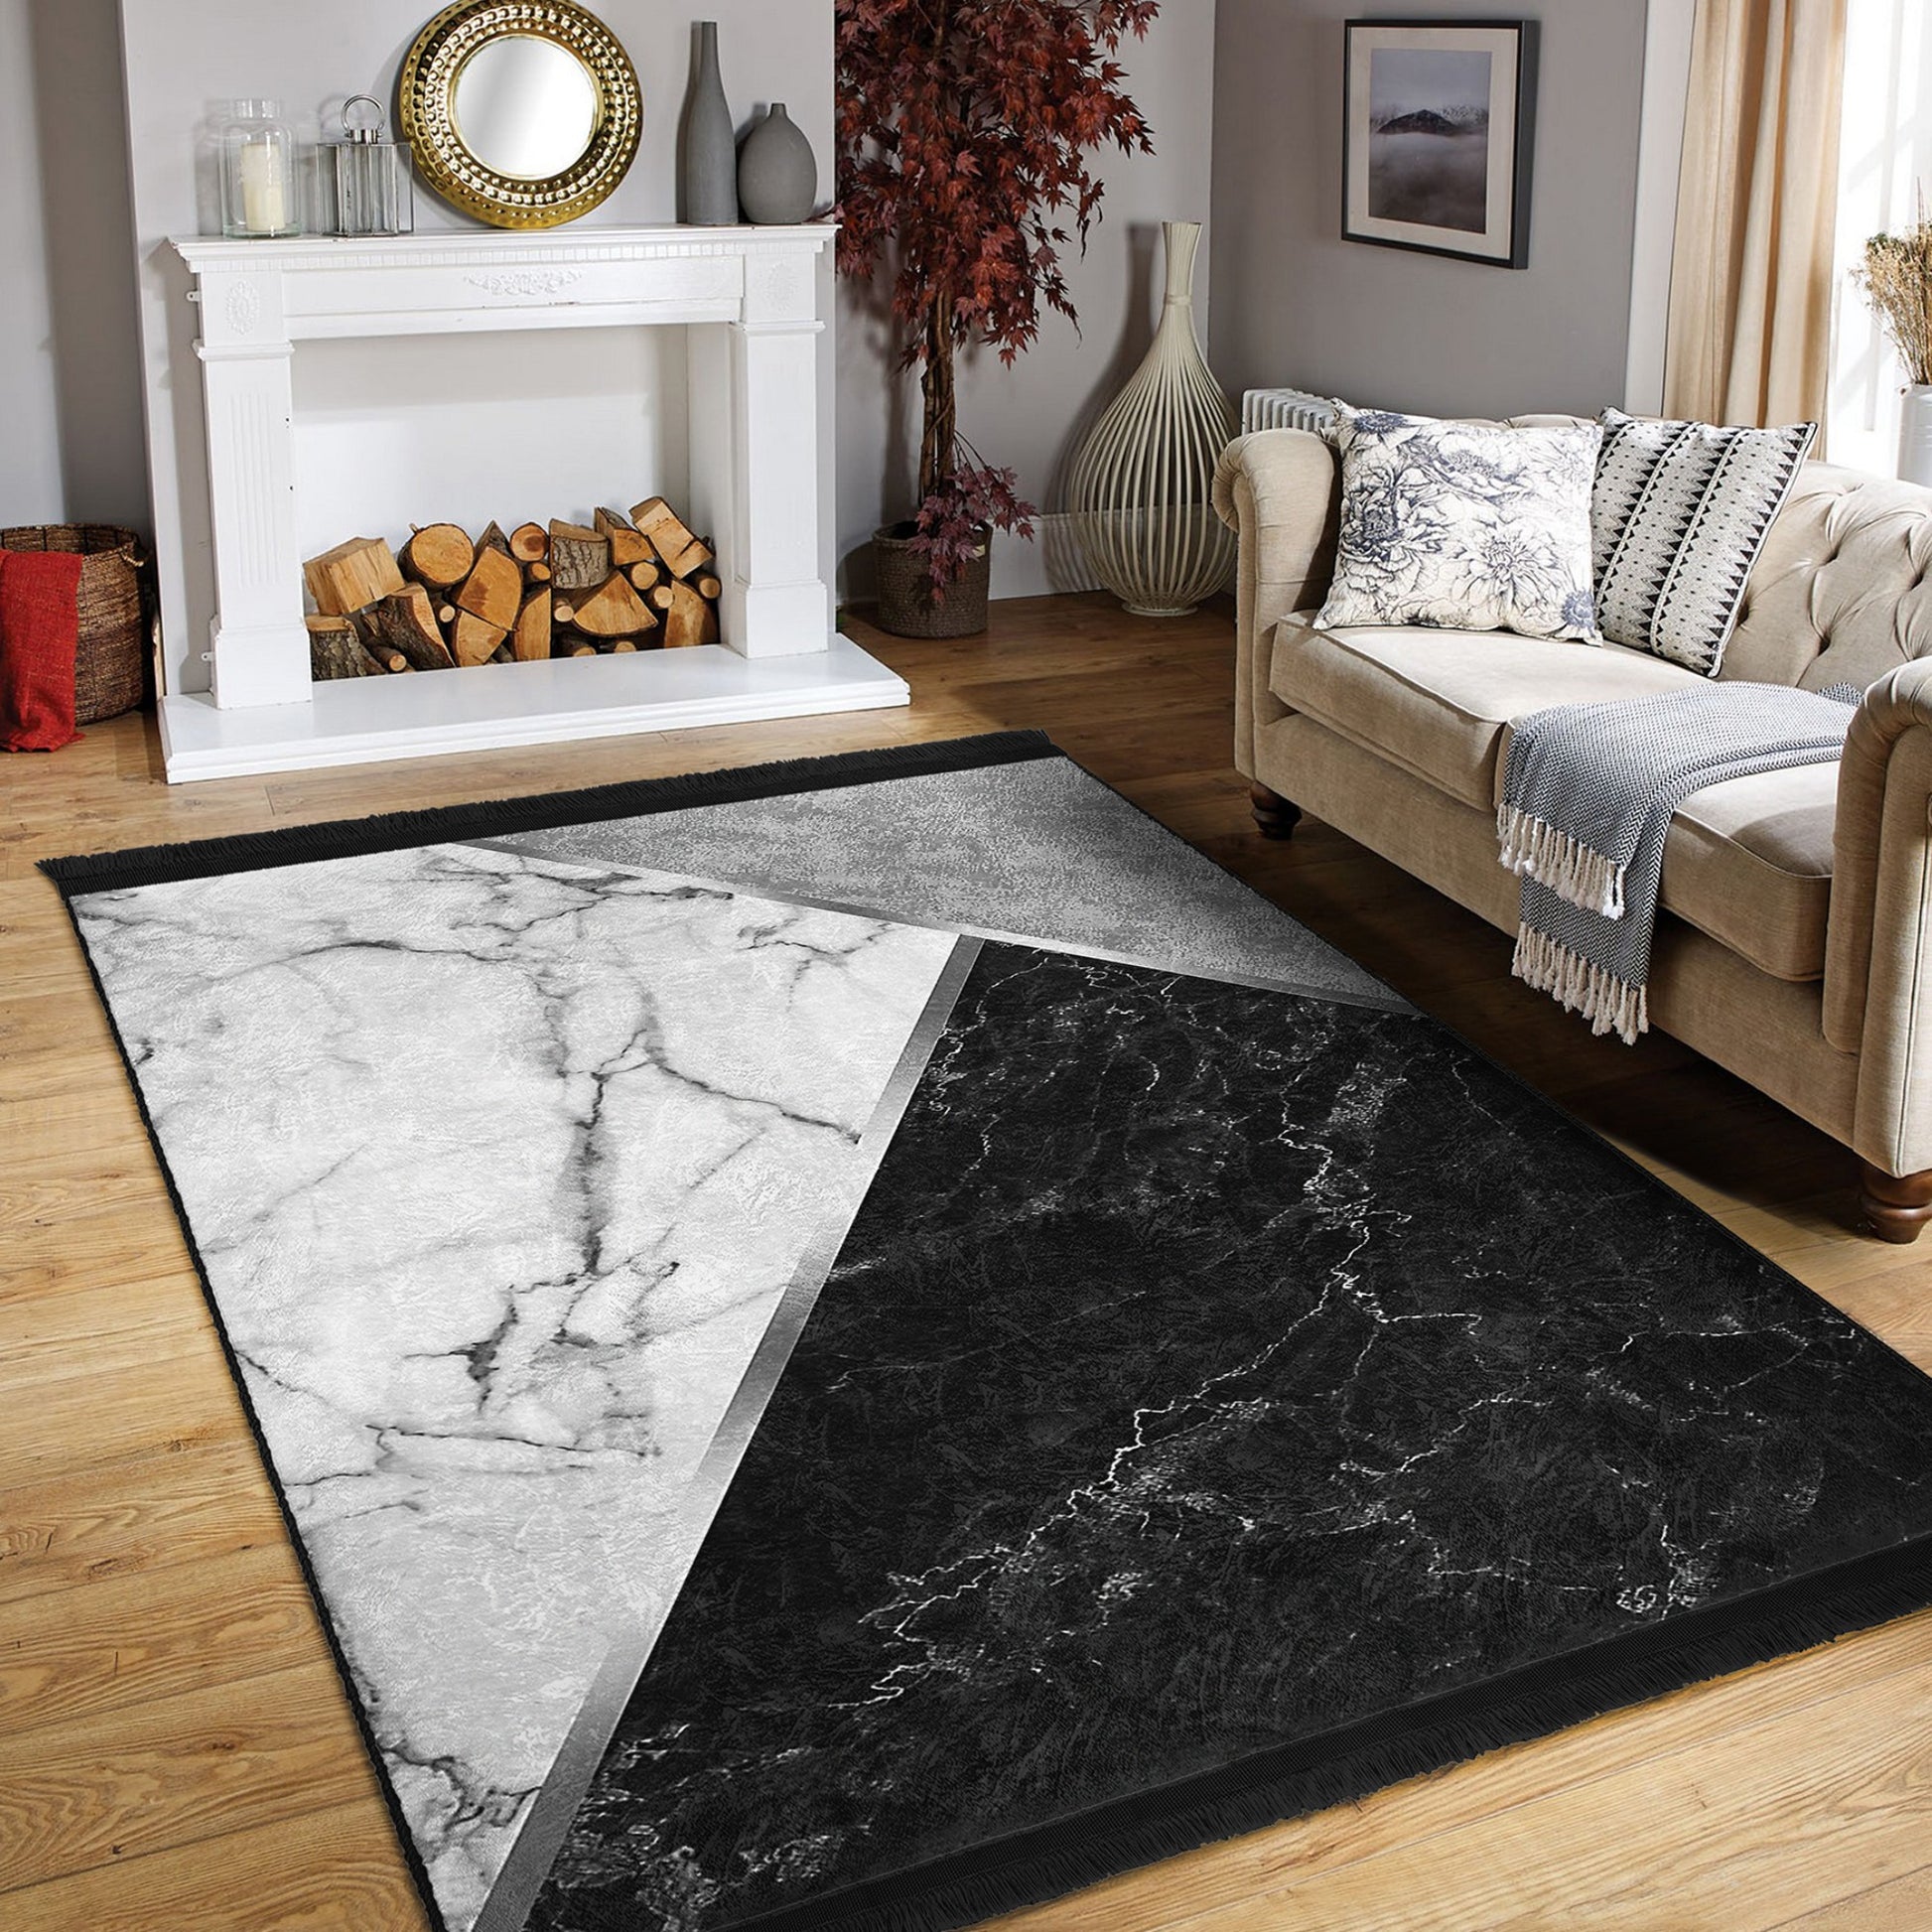 Decorative Area Rug with a Sleek Blend of Black and White